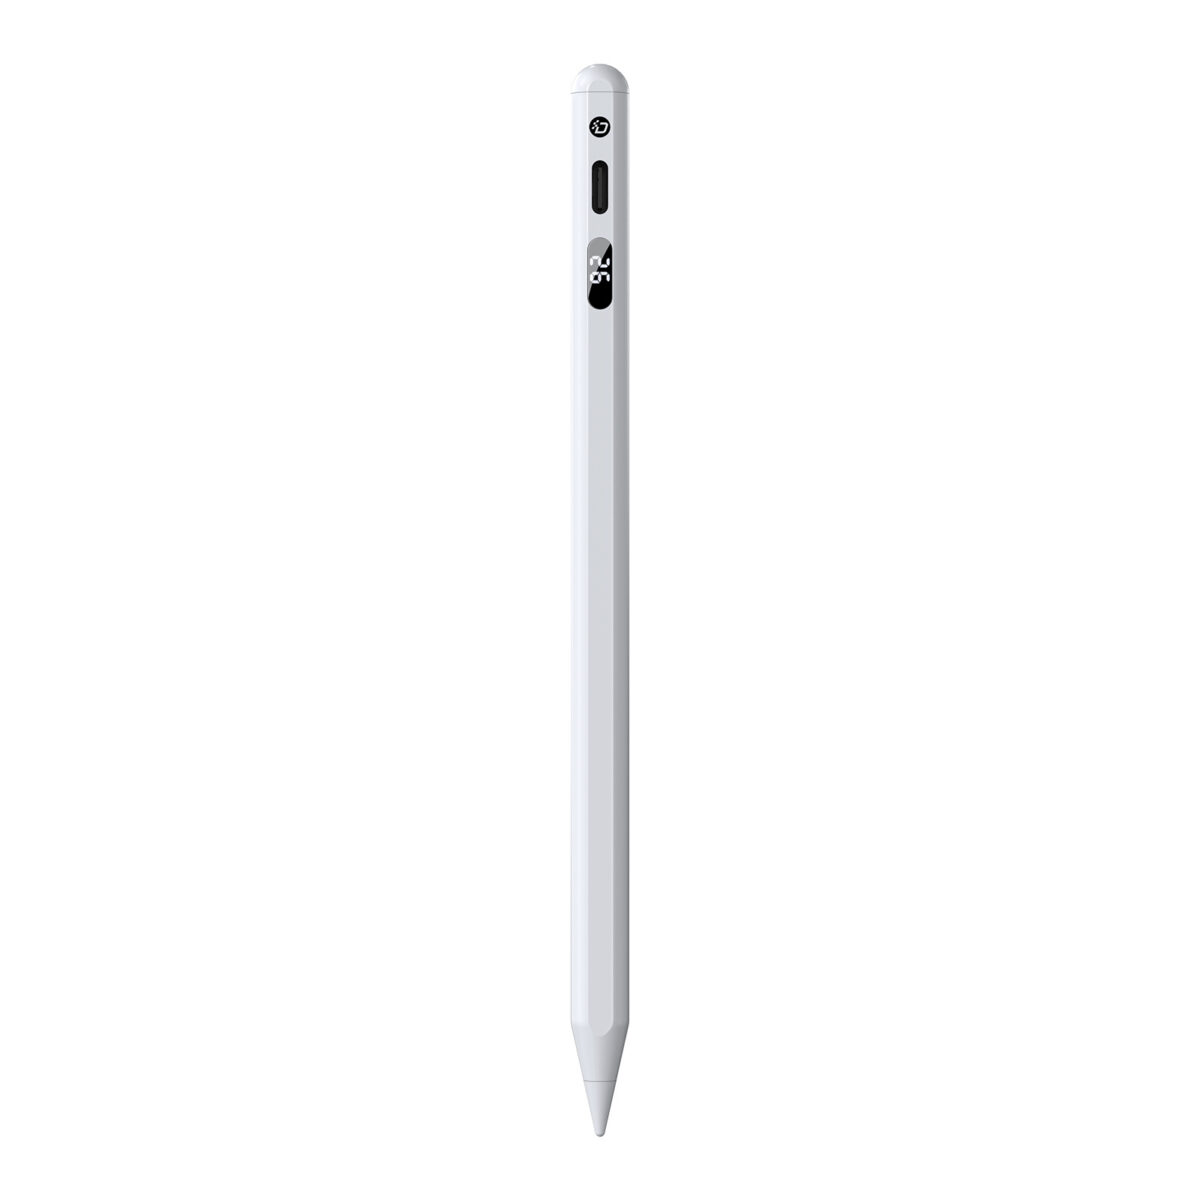 SP-02 Stylus Pen with Power Display for iPad